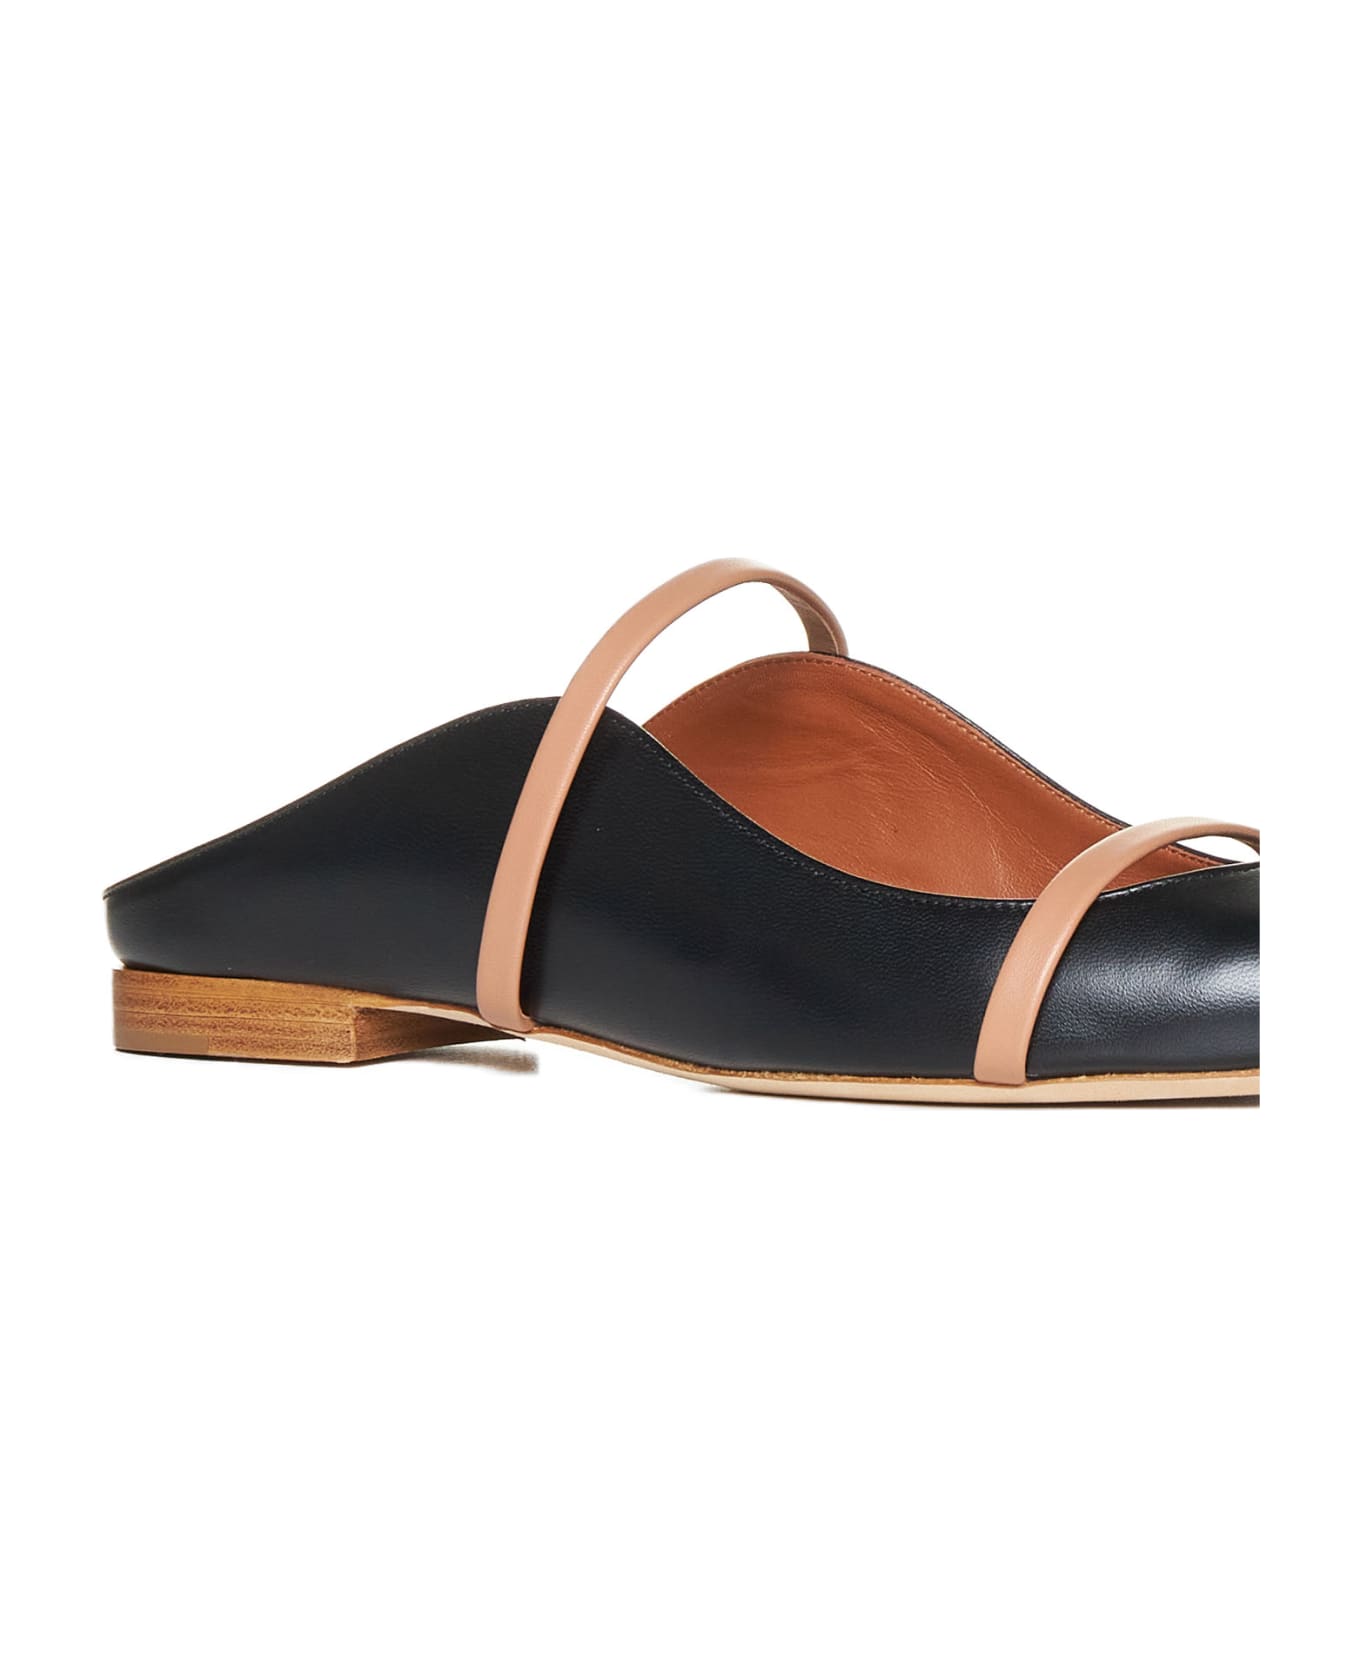 Malone Souliers Sandals - Black nude